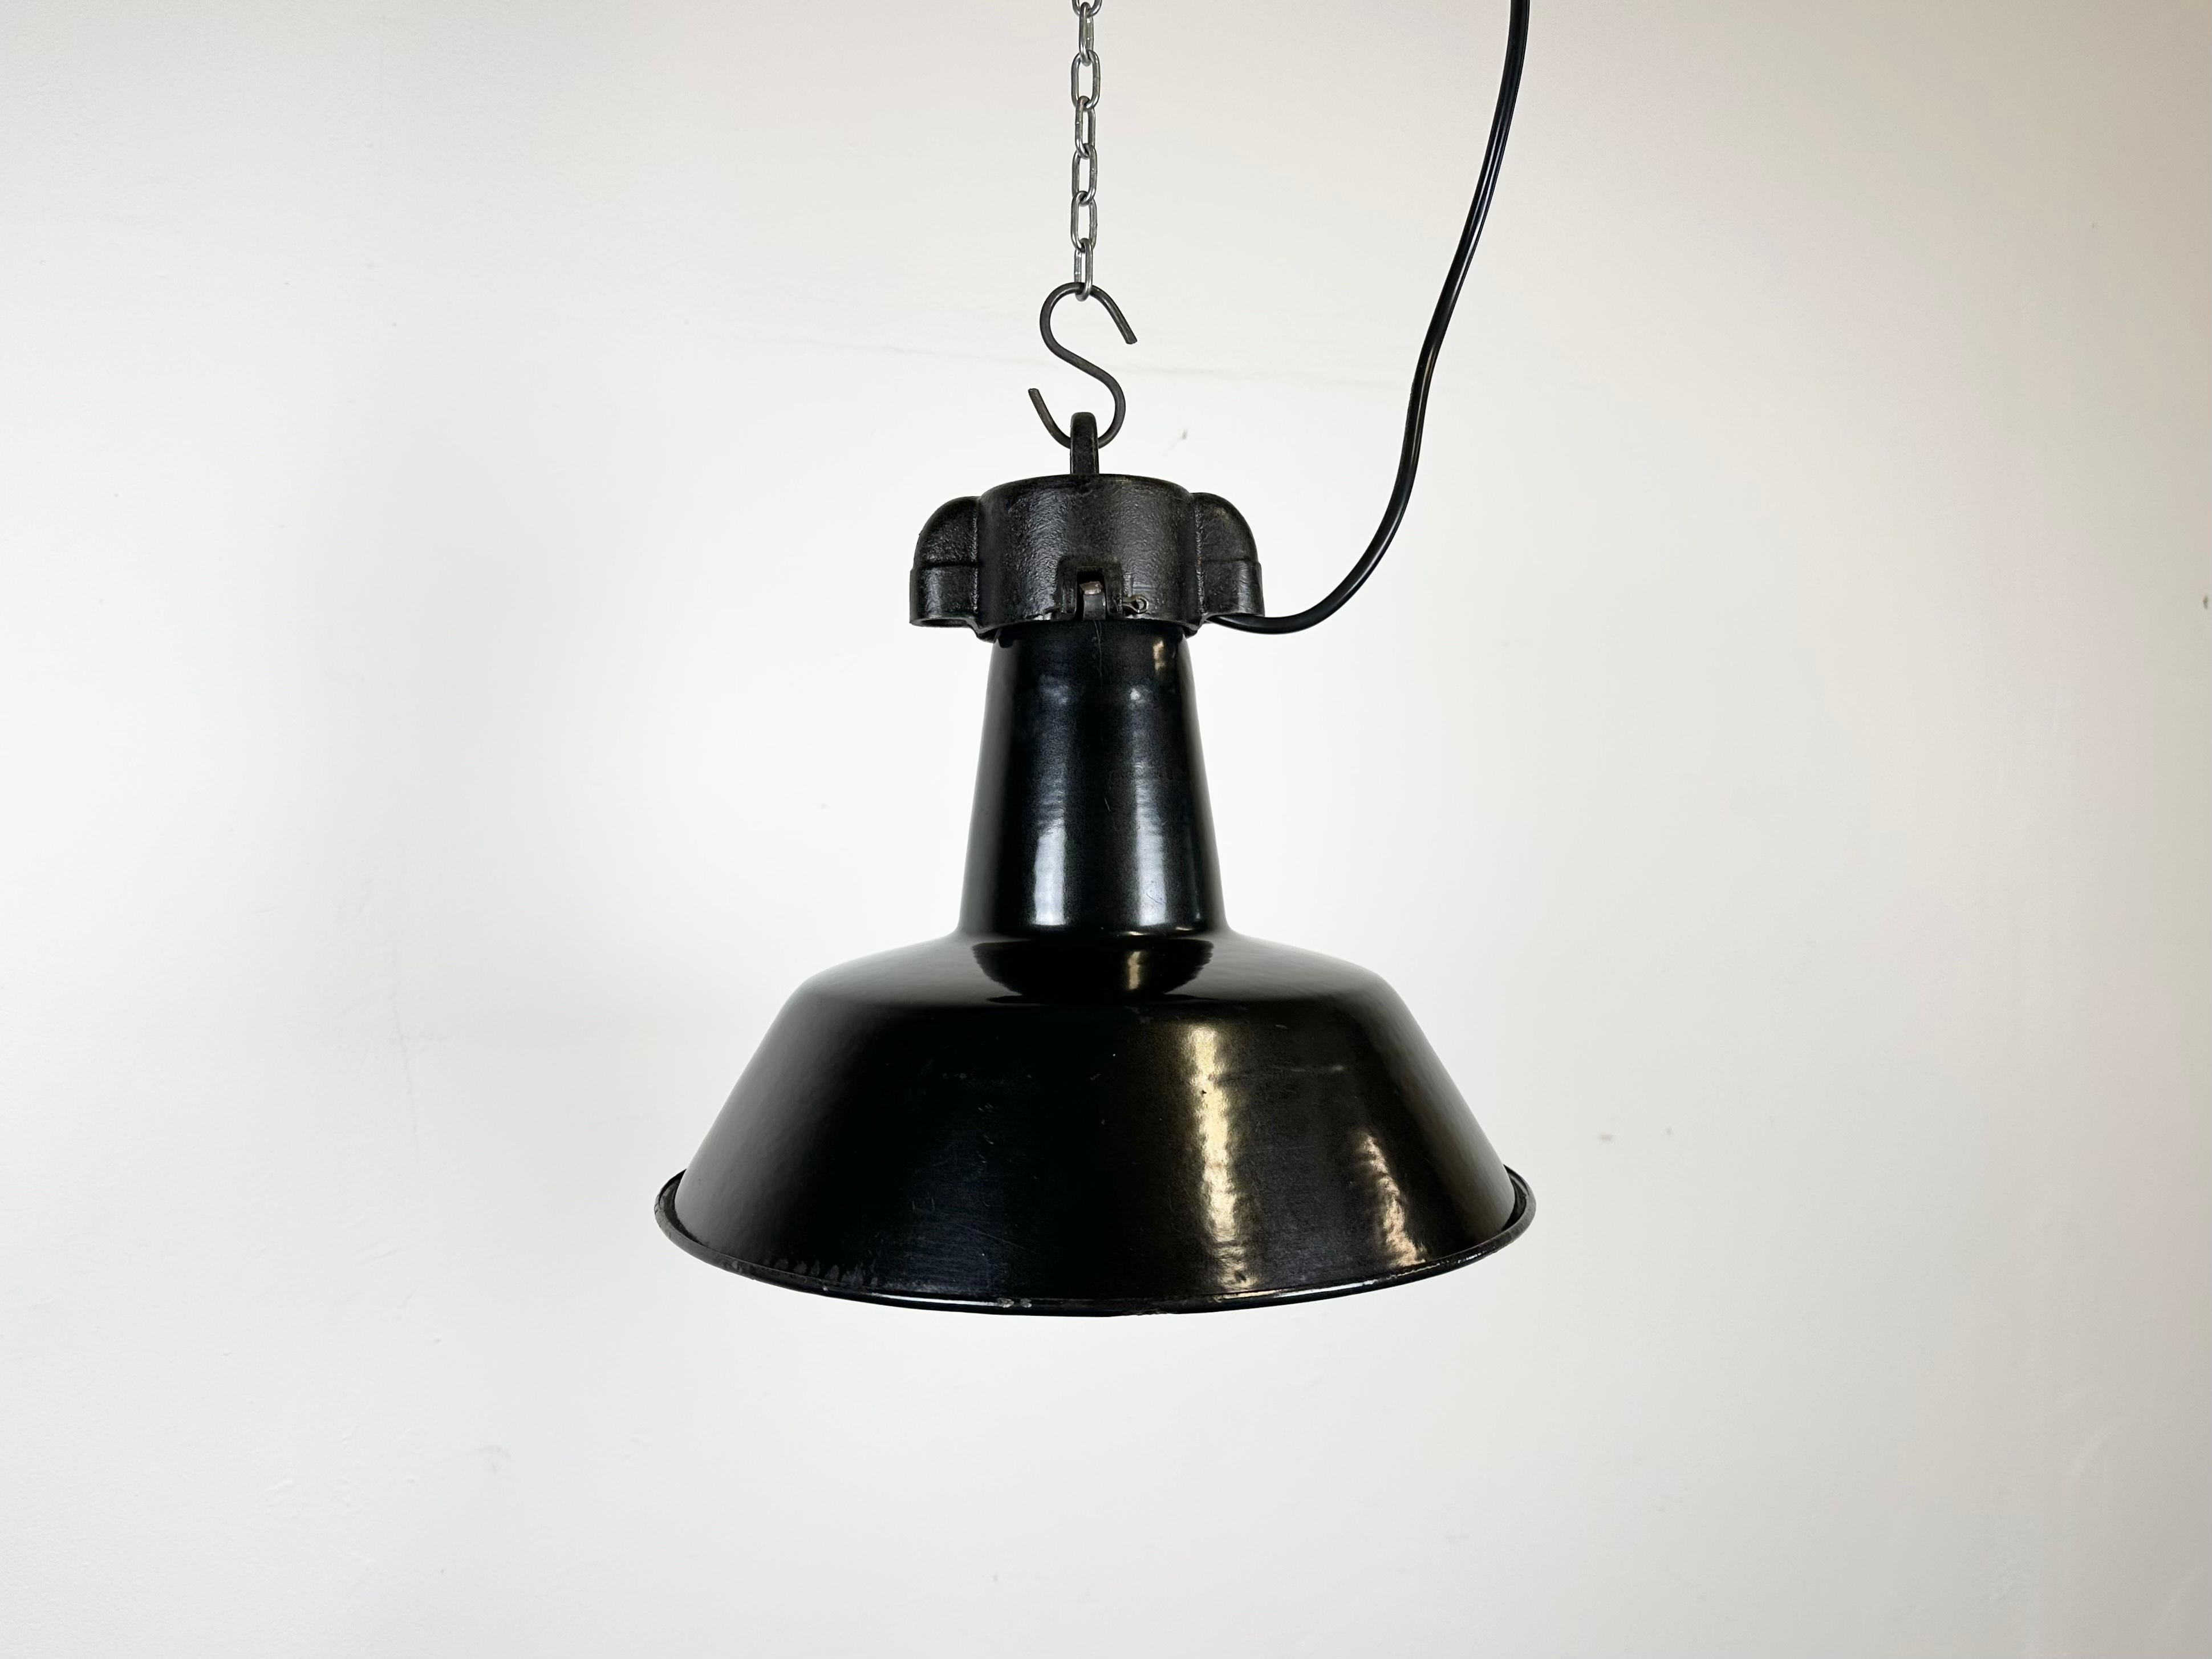 Industrial black enamel pendant light made in former Czechoslovakia during the 1960s. White enamel inside the shade. Cast iron top. The porcelain socket requires E 27/ E26 light bulbs. New wire. Fully functional. The weight of the lamp is 1,5 kg.